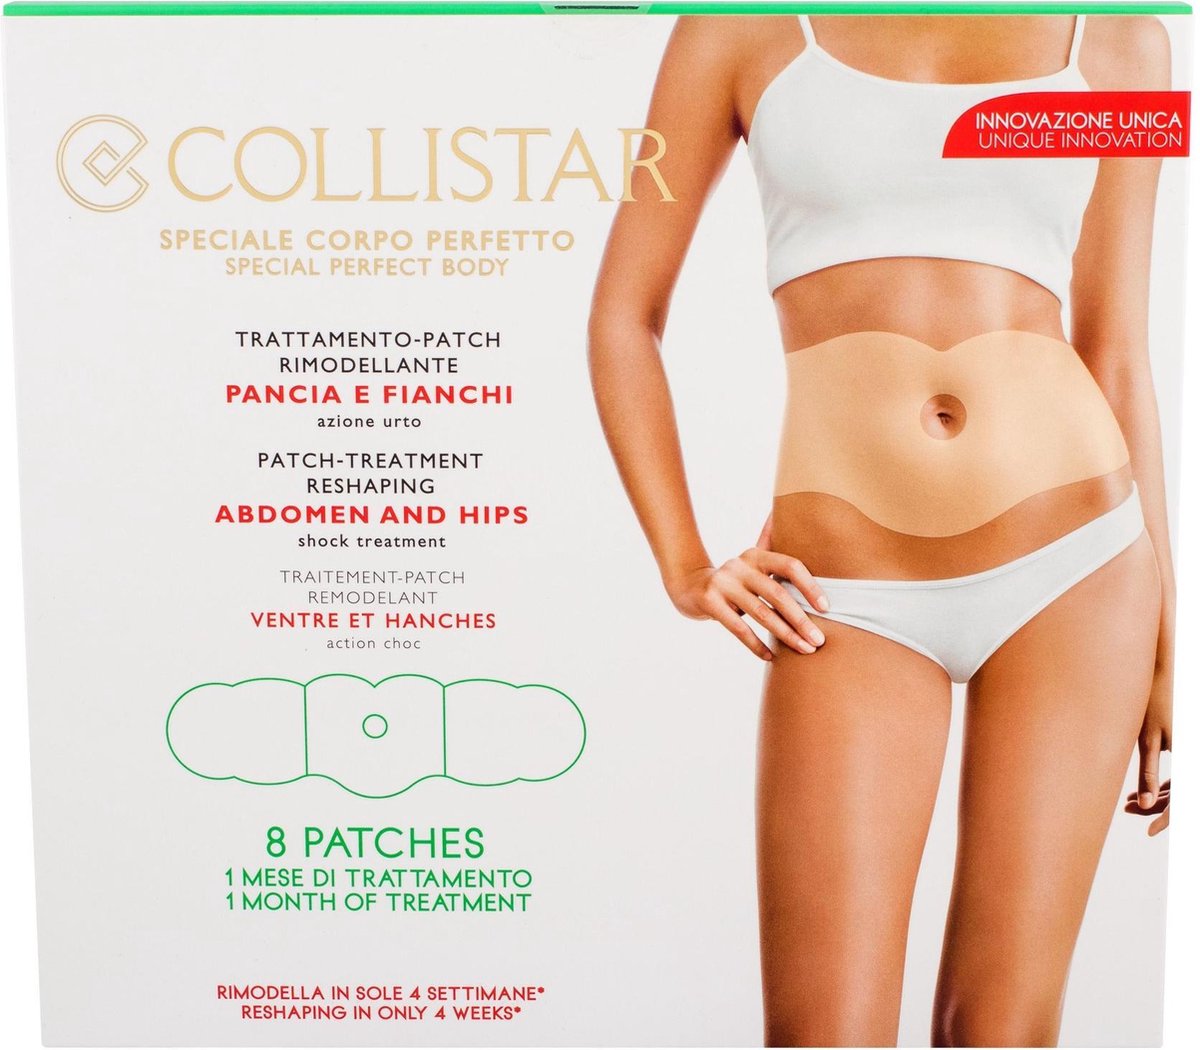 Collistar Body - Body Patch-treatment Reshaping Abdomen And Hips